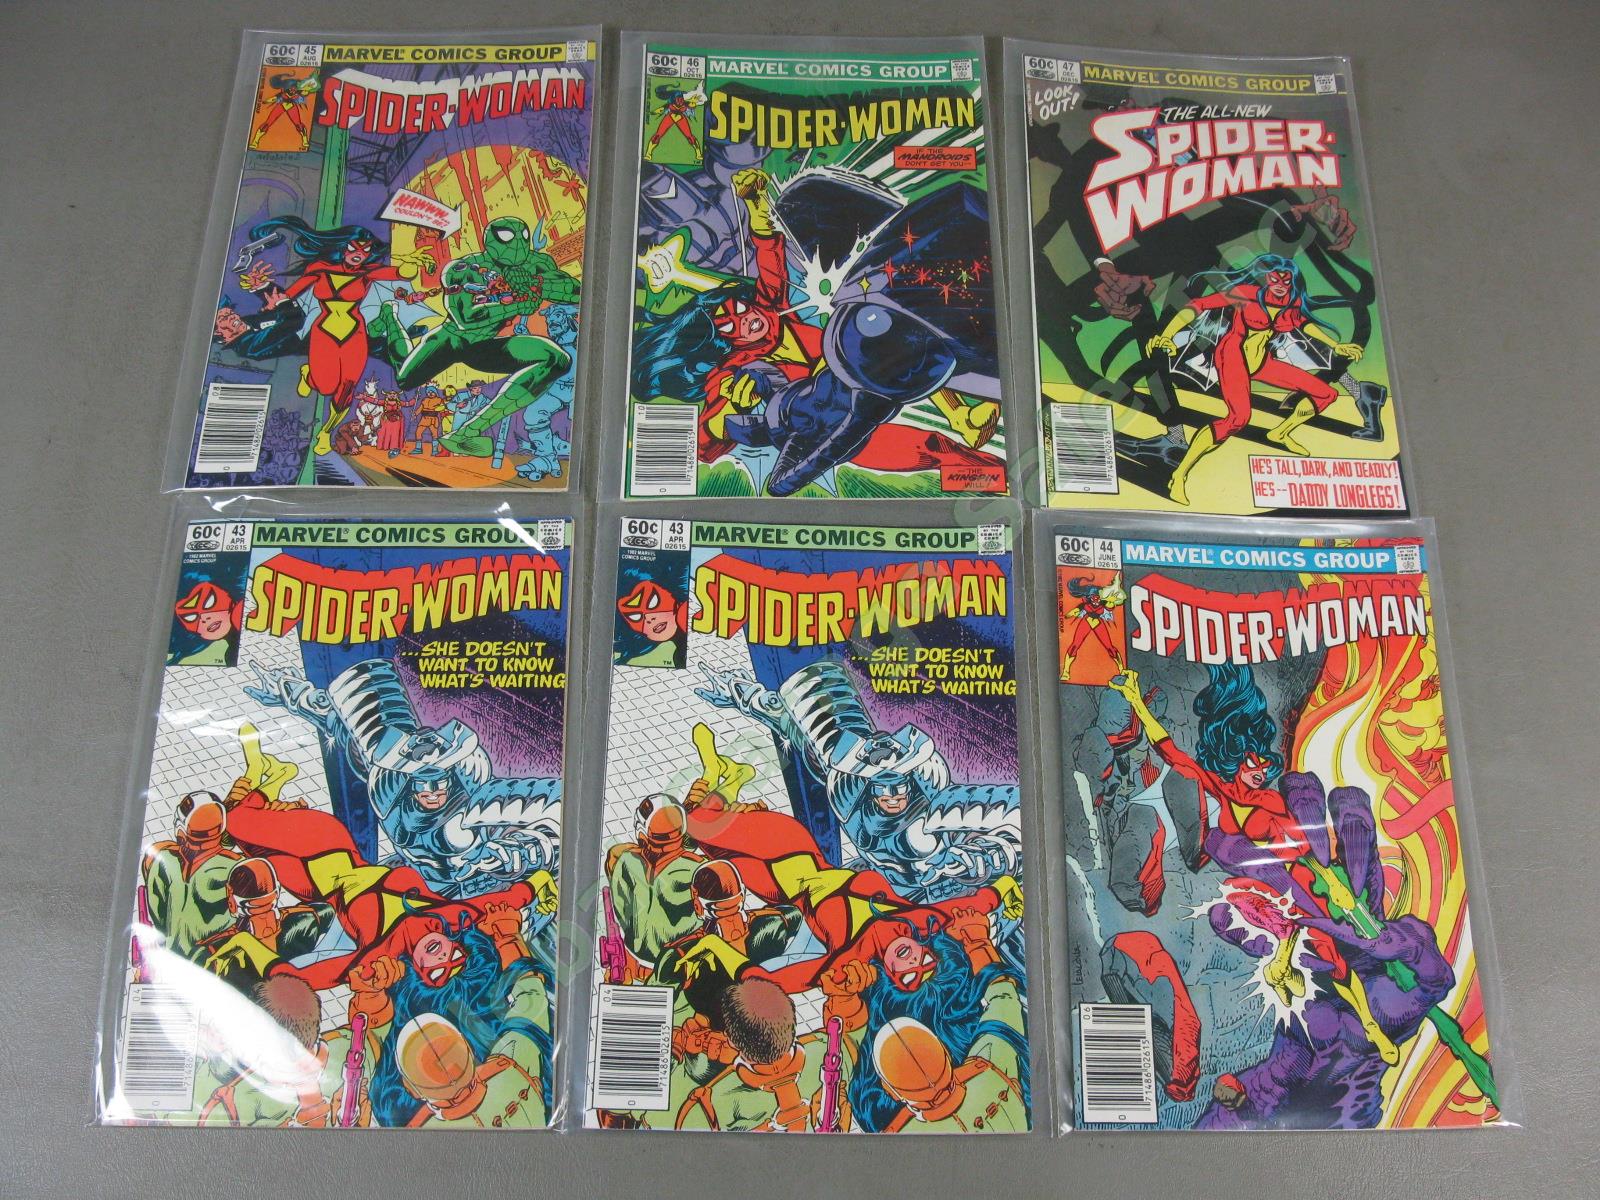 48 Vtg Marvel Spider-Woman Comic Book Collection Lot Runs 1-8 10-36 38-40 42-50 13